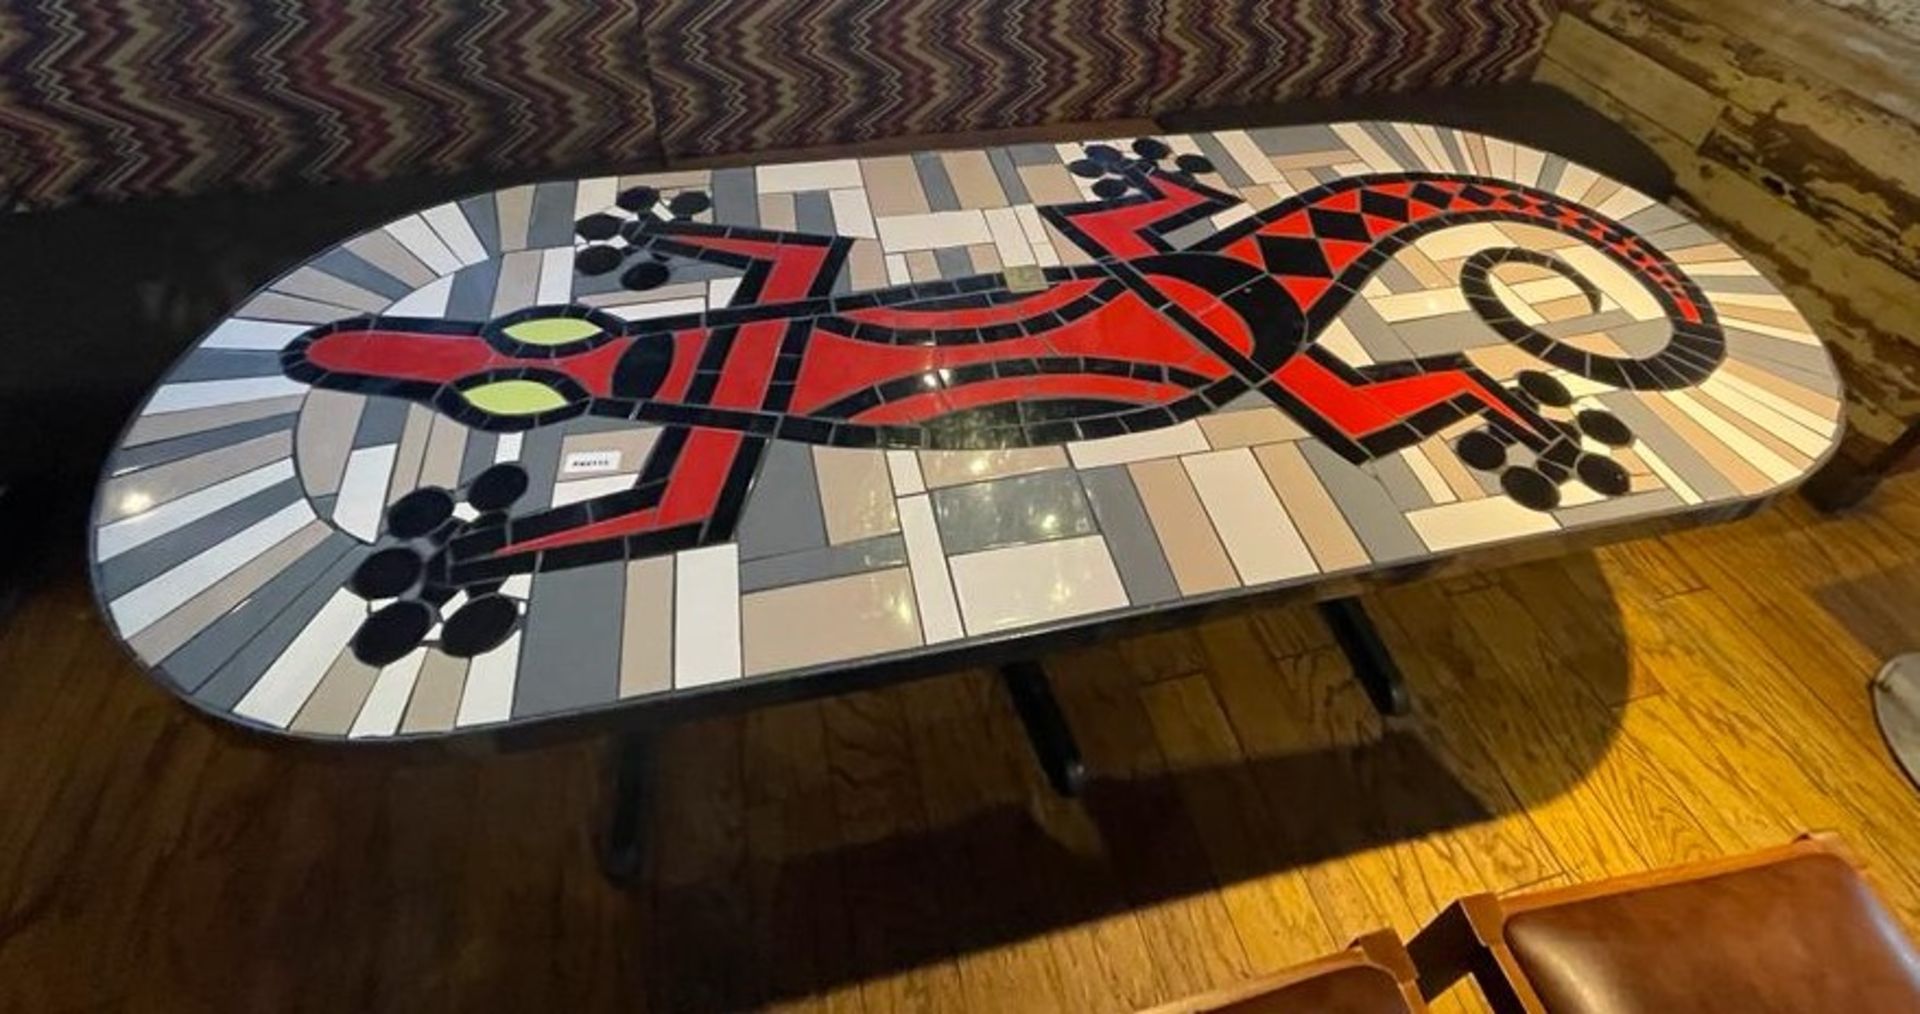 1 x Bespoke Gecko Lizard Mosaic Dining Table With Cast Iron Bases - Ref: PAV113 - Height H74 x - Image 5 of 5